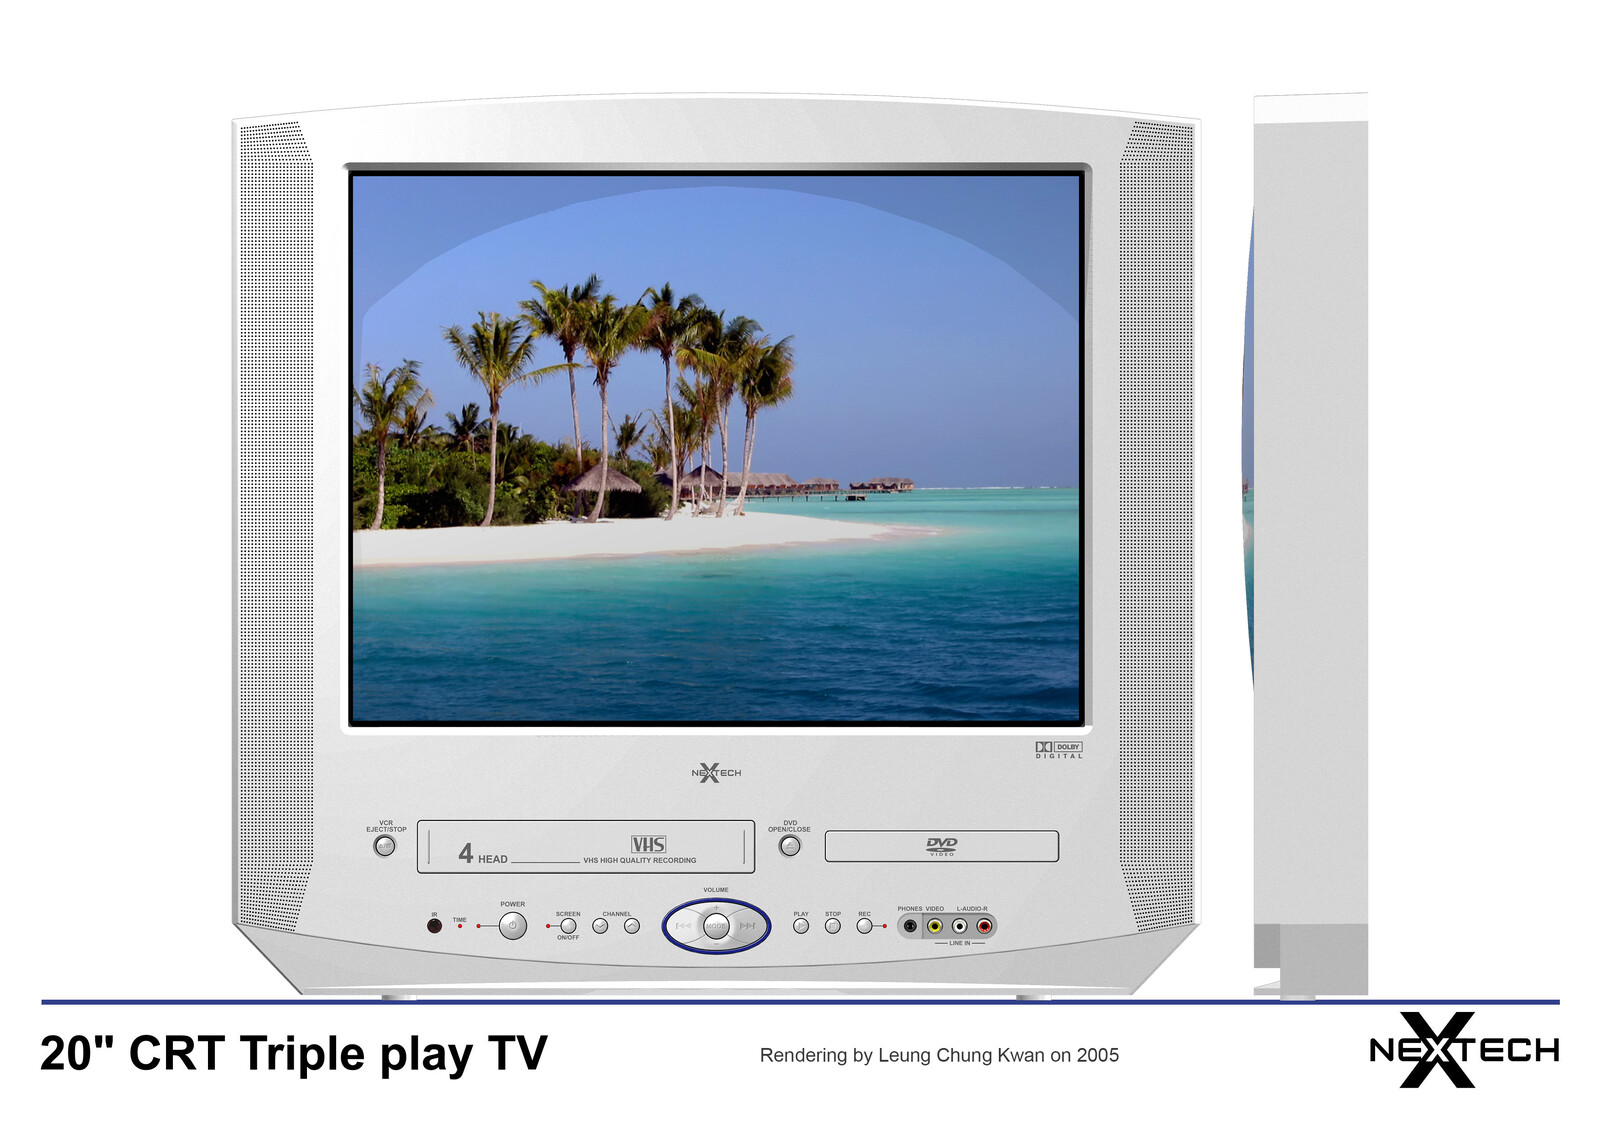 💎 20" Triple Play TV | Rendering by Leung Chung Kwan on 2005 💎
Brand Name︰NEXTECH | Client︰Star Light Electronics Co., Ltd.